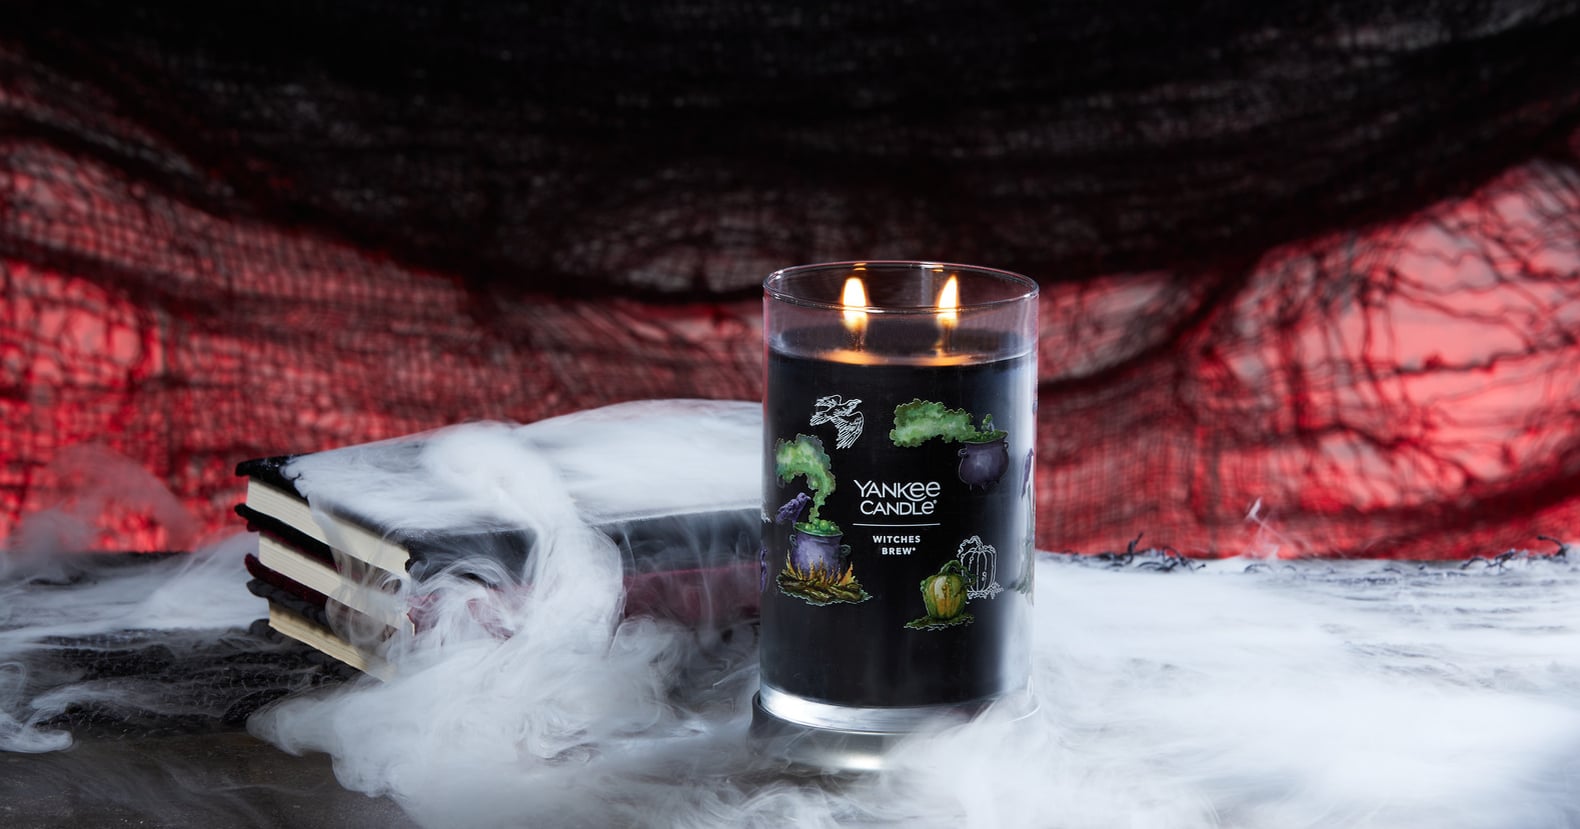 It’s Official: Yankee Candle’s Halloween Collection Is Coming